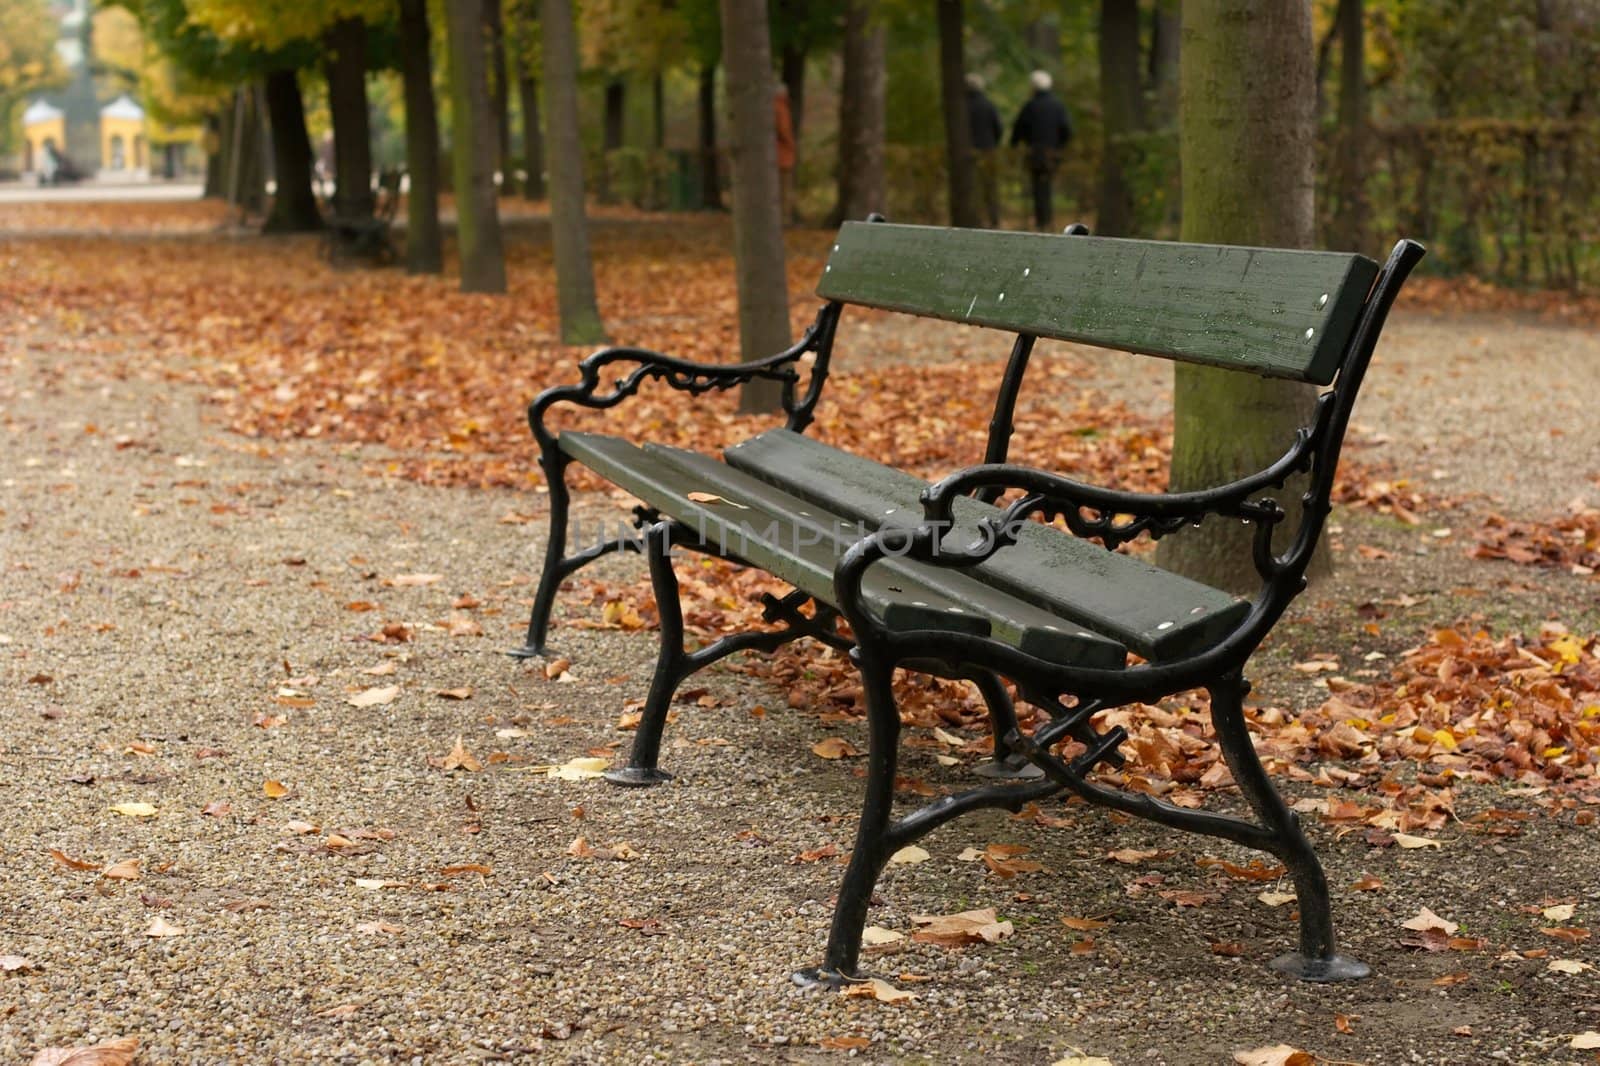 Bench in an autumn park with fallen leaves